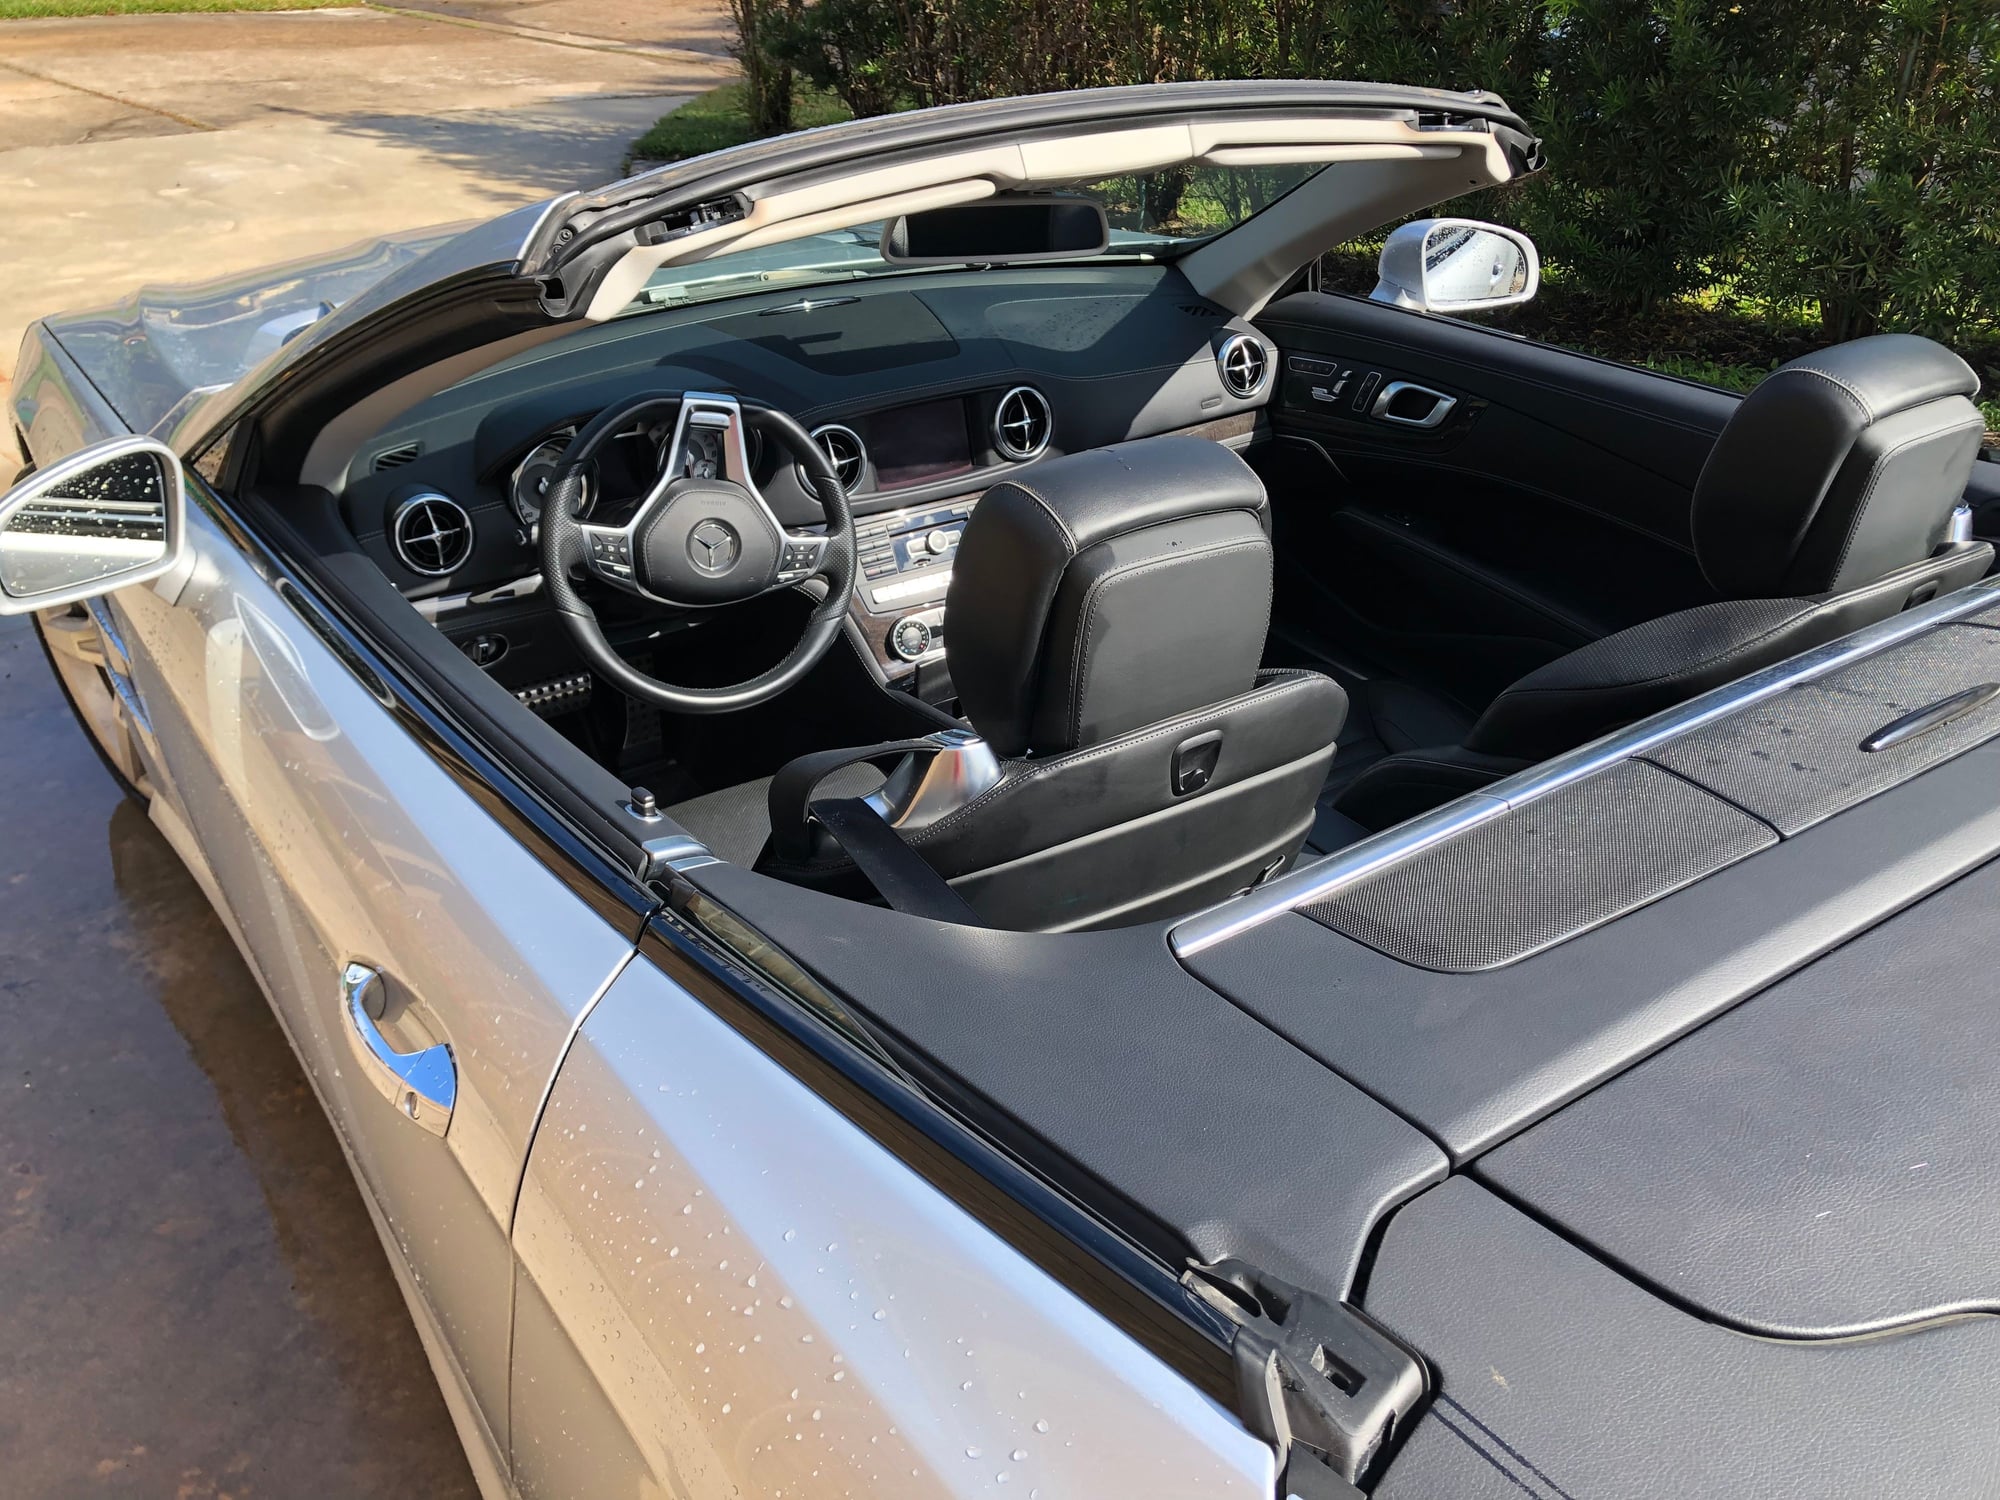 2013 Mercedes-Benz SL550 - The SL550 - Classic Hard top retractable roof - Used - VIN WDDJK7DA7DF016179 - 26,624 Miles - 8 cyl - Convertible - Silver - Houston, TX 77265, United States